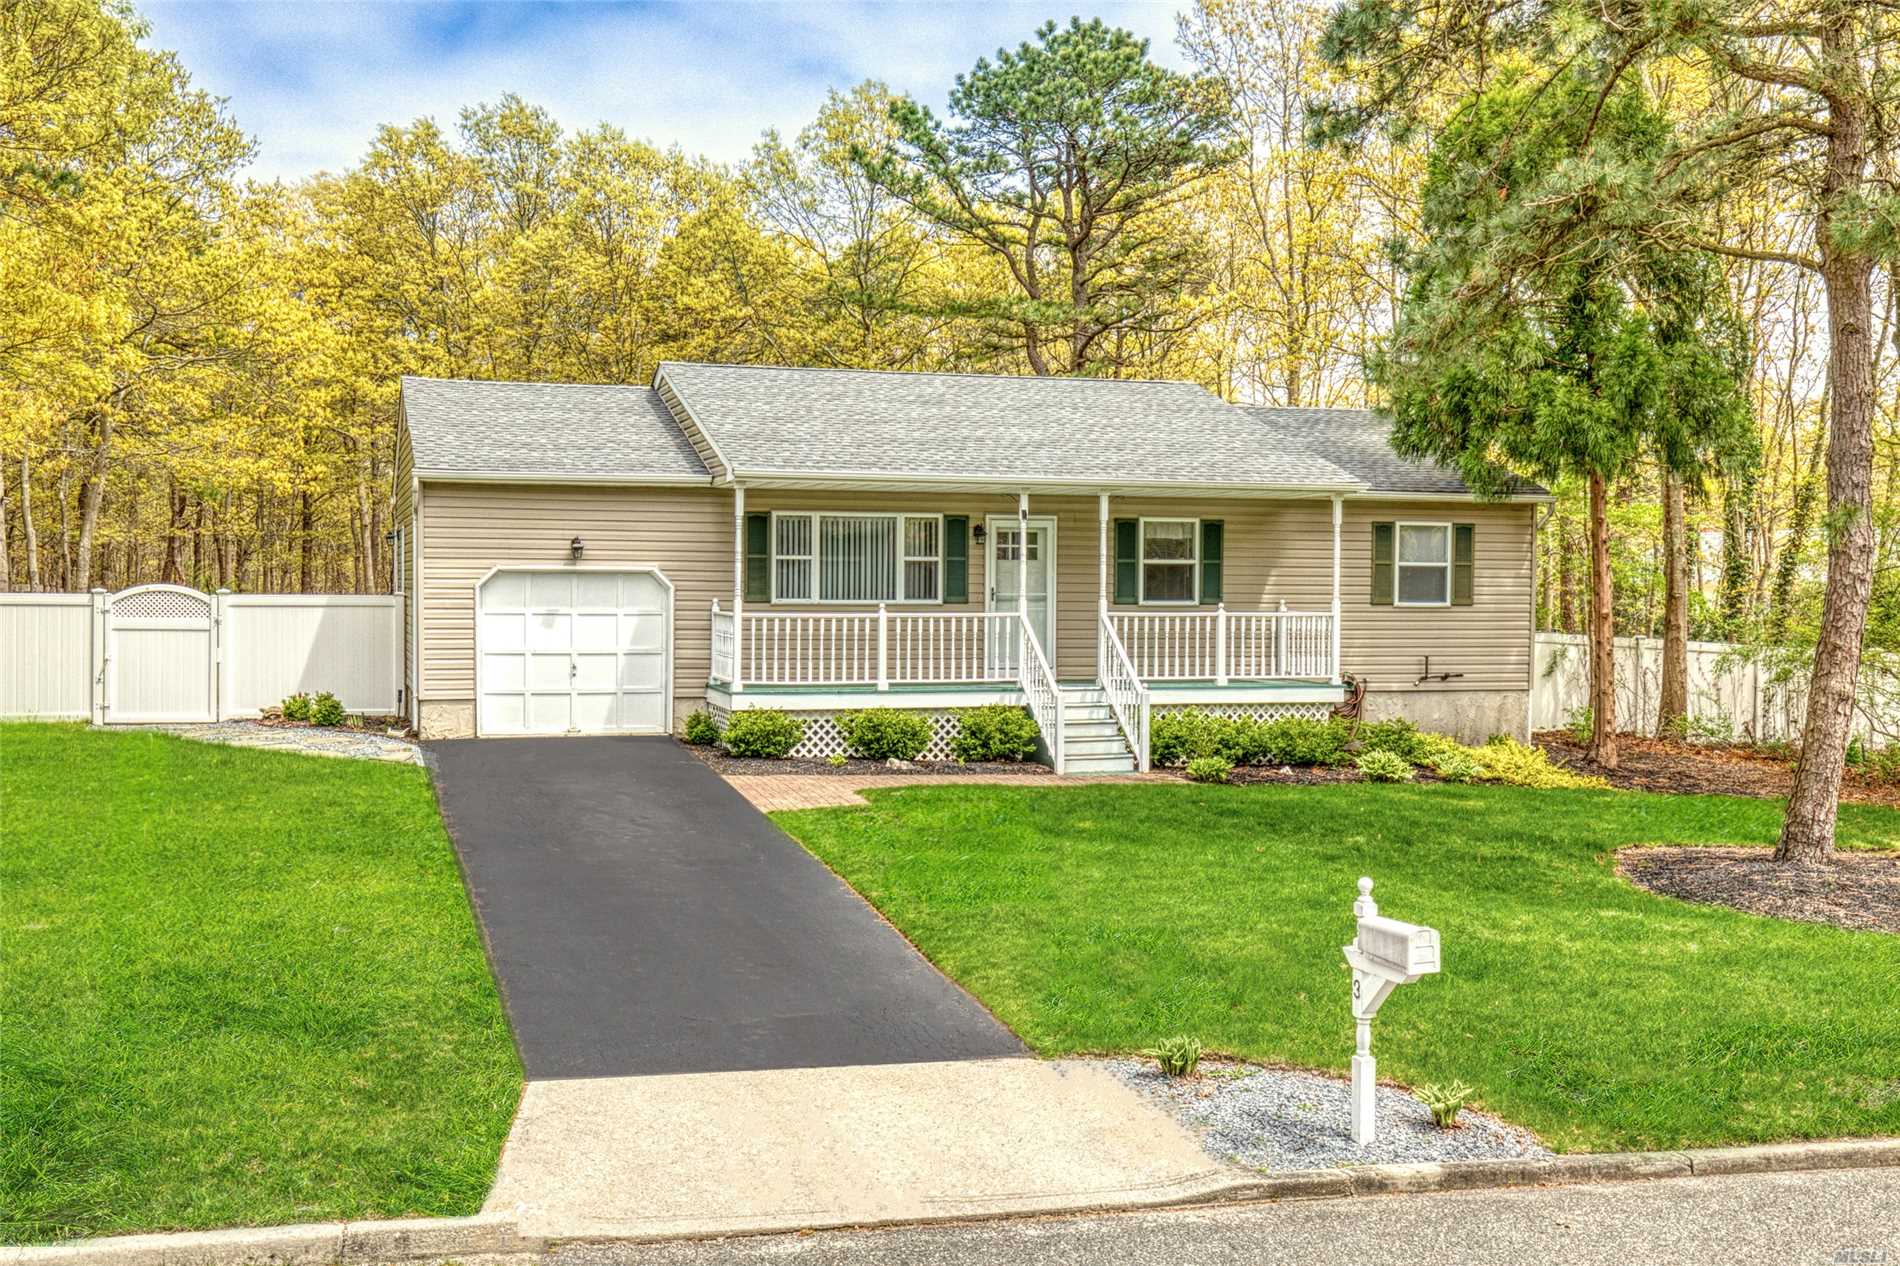 This Beautifully Updated Home is Situated on a Quiet Street and Features: EIK w/Stainless Steel Appliances, Dining Room w/french doors, Master Bedroom w/full Bath, 2 Additional Bedrooms, Office, Bright and Airy Living Room, Full Finished Basement & 1 Car Garage. Tree Lined Backyard is very private. Call Today!